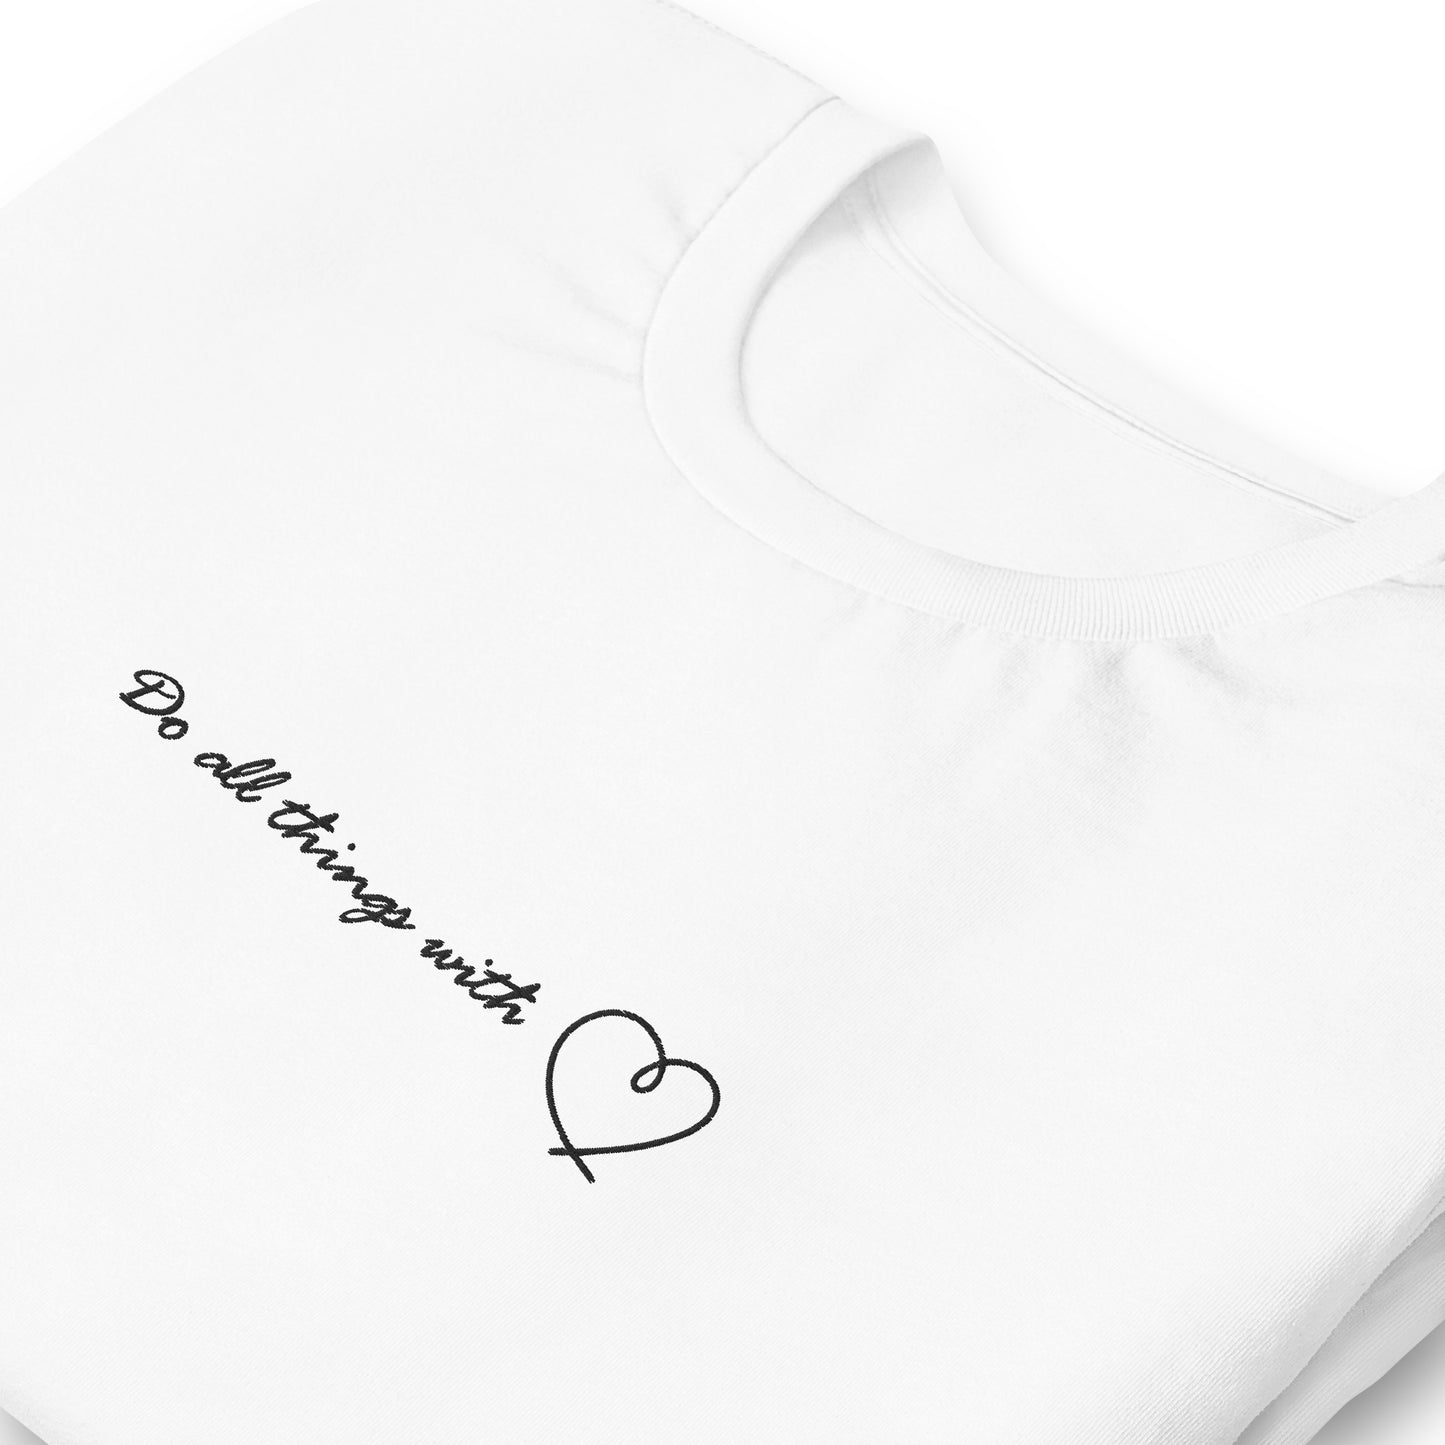 Do all things with love - embroidered T-shirt